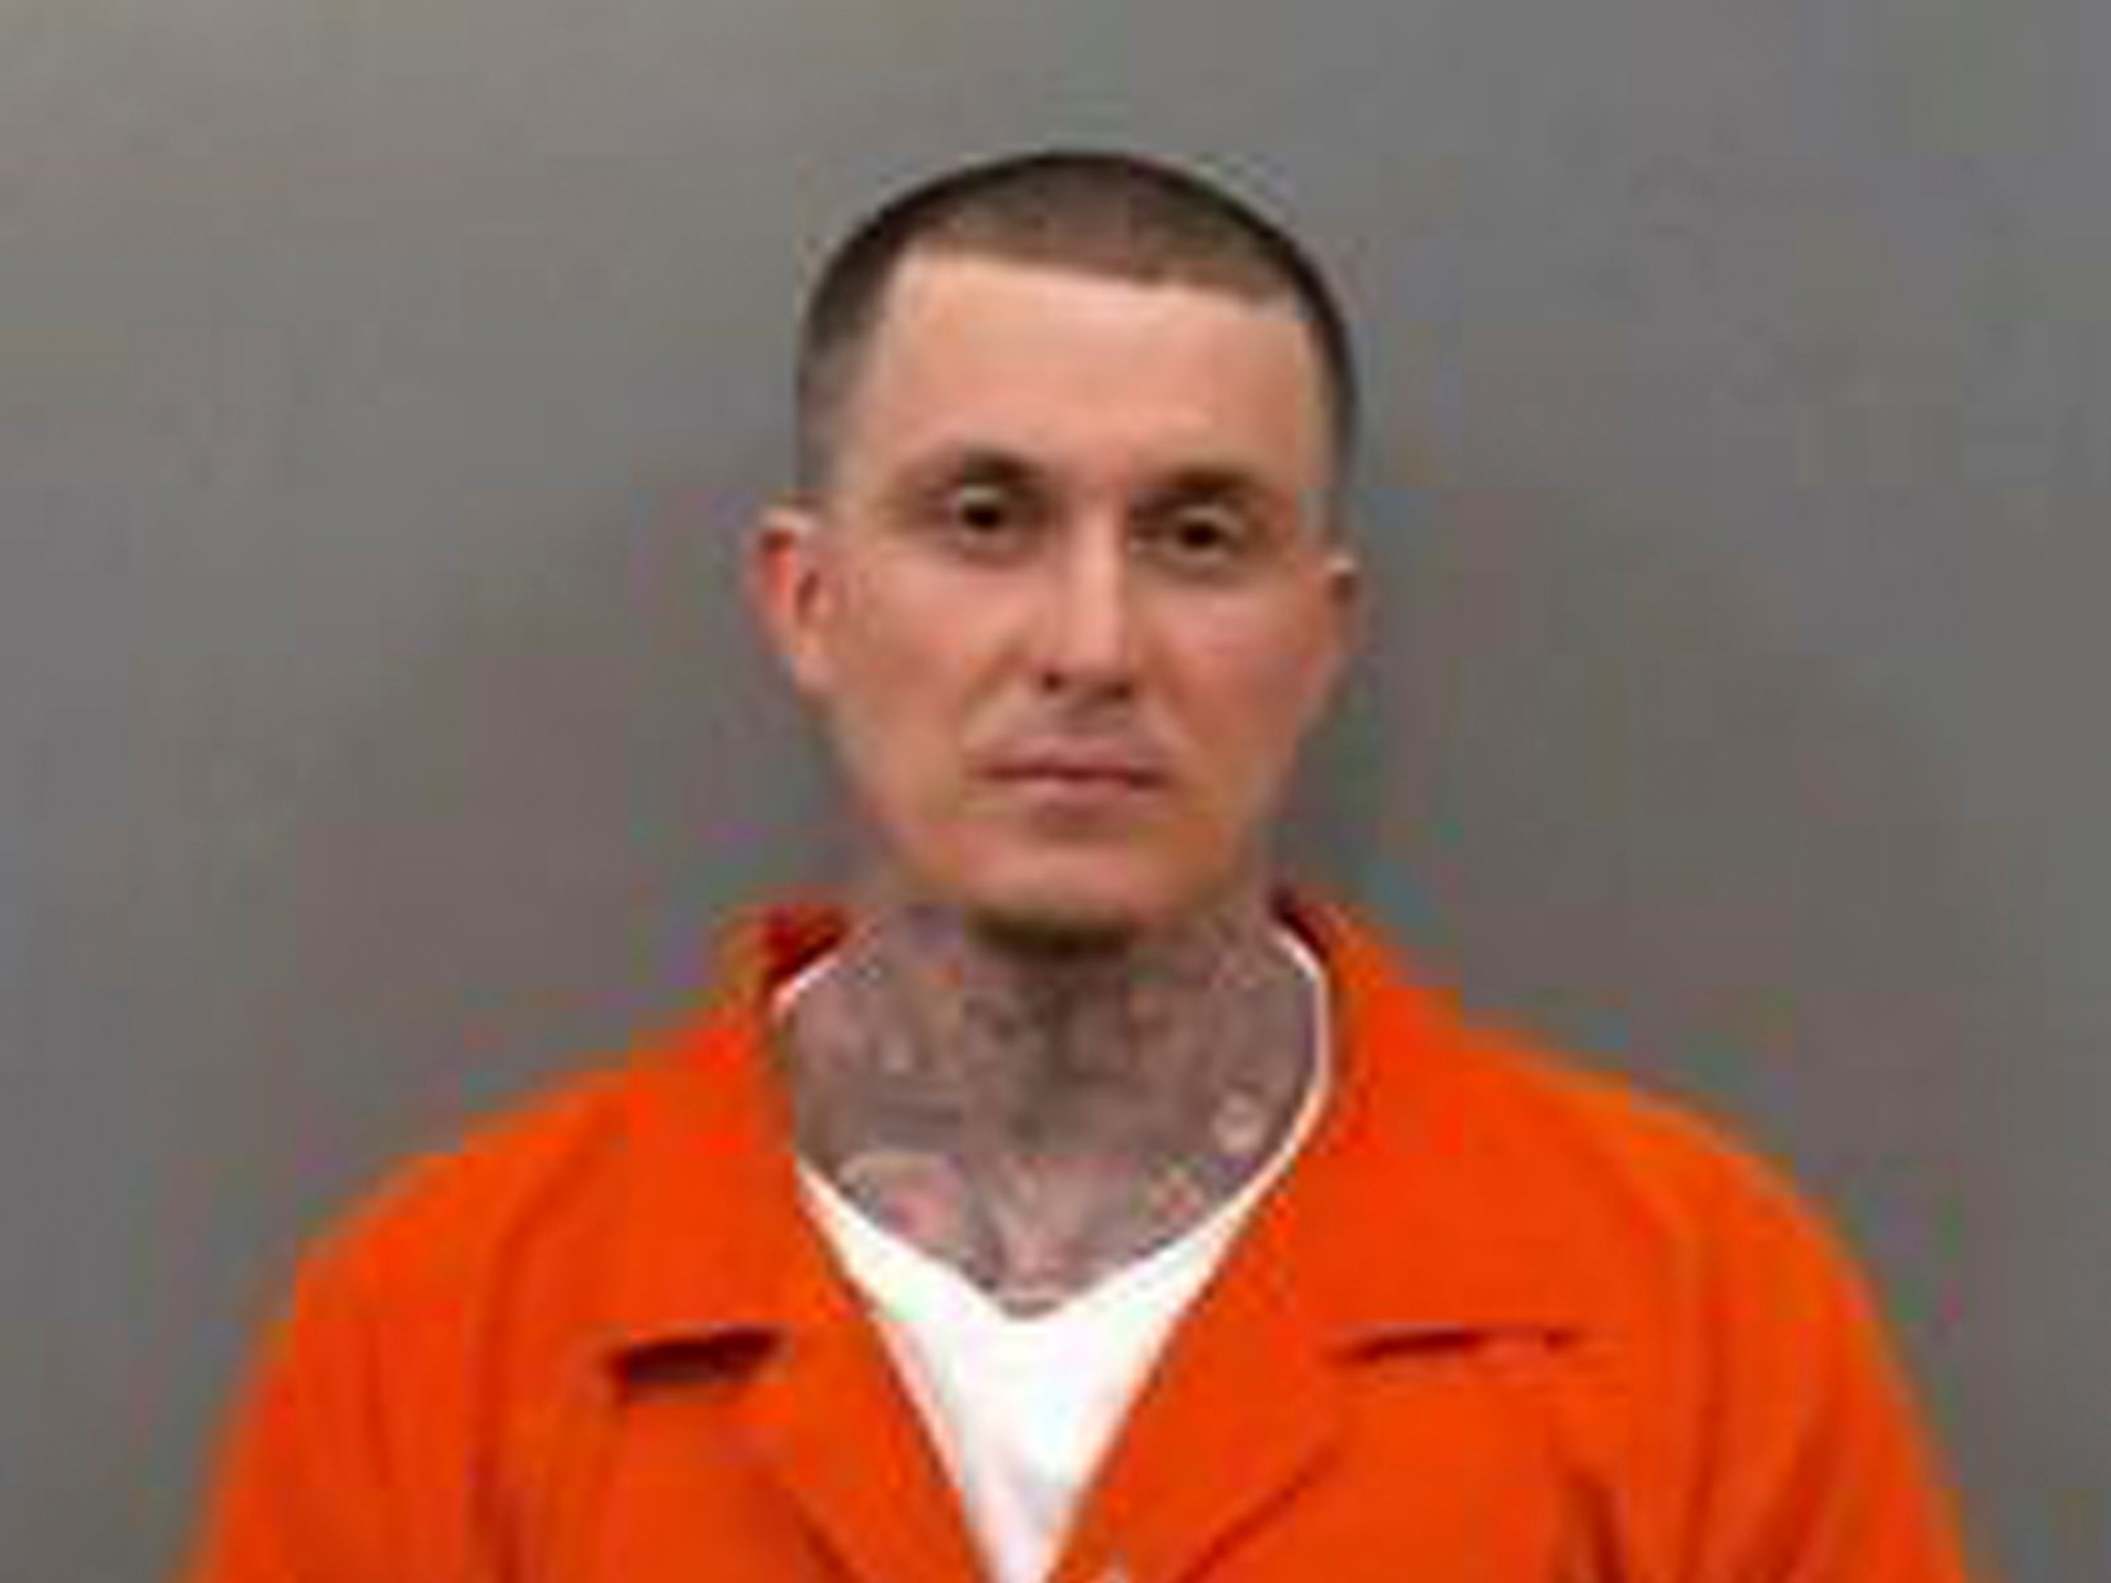 Wesley Gullett, a leader of a white supremacist gang in Arkansas, has escaped a local jail and is being sought by authorities